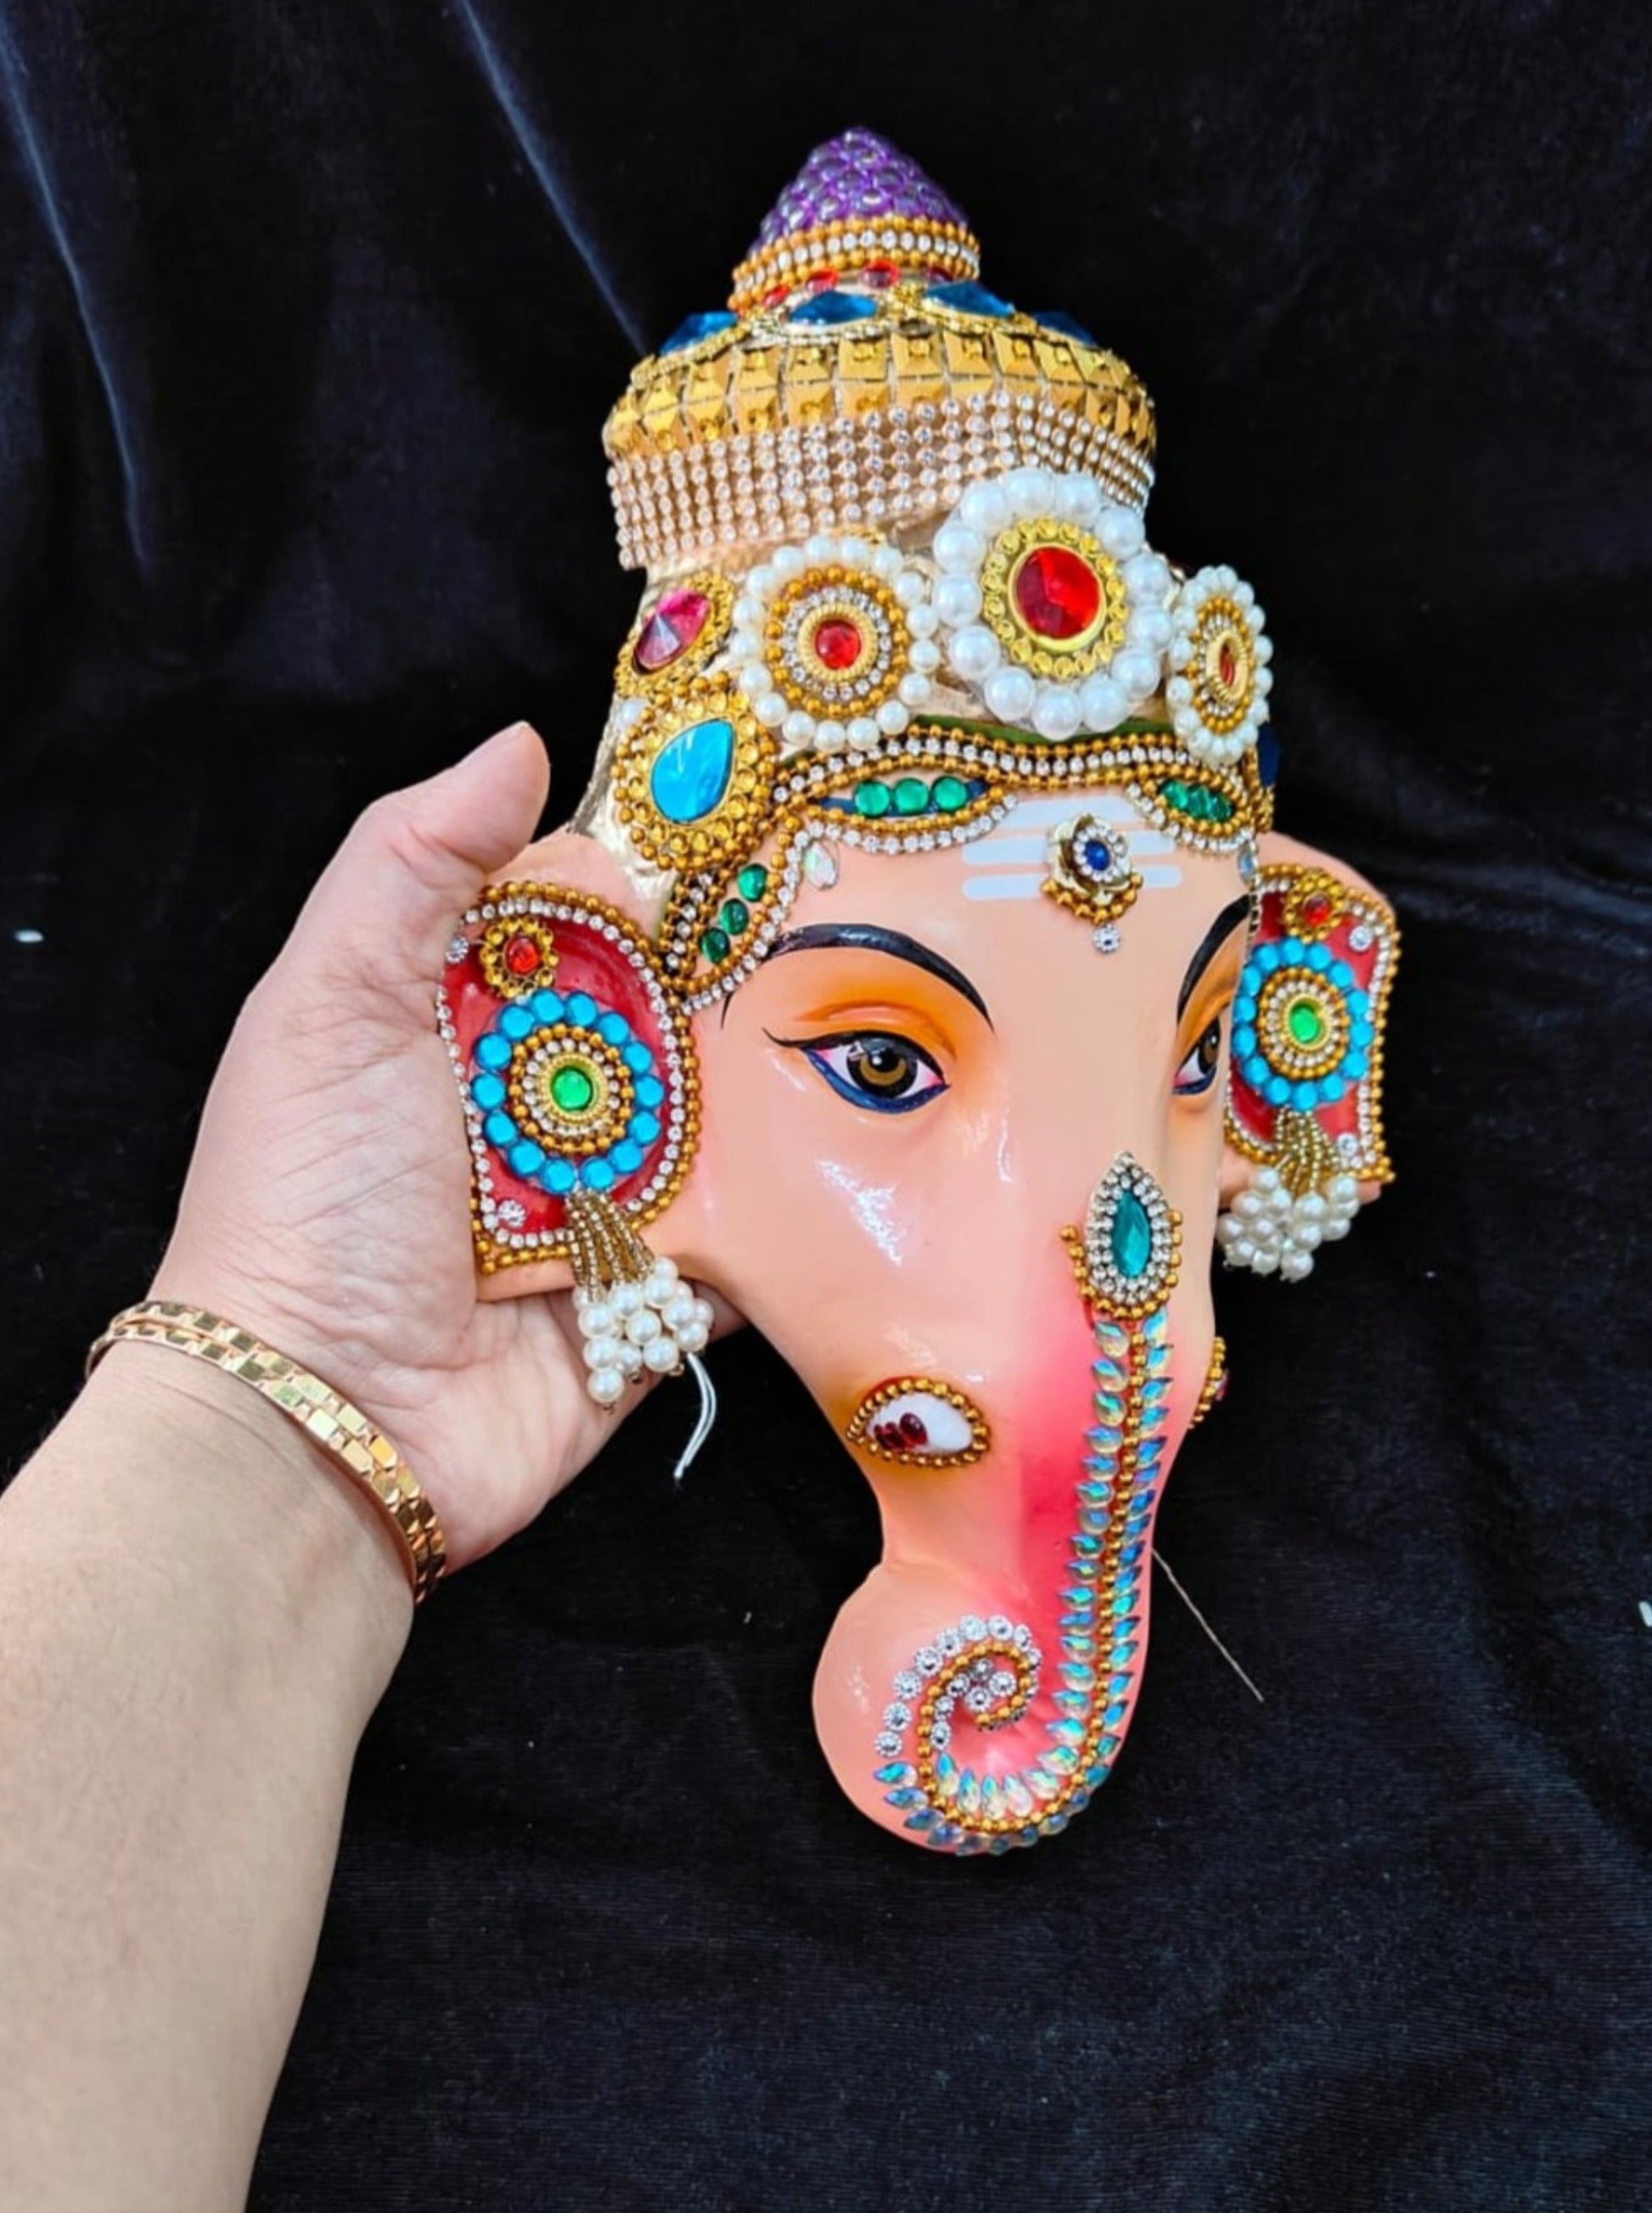 Papermache lord ganesha face decoration 